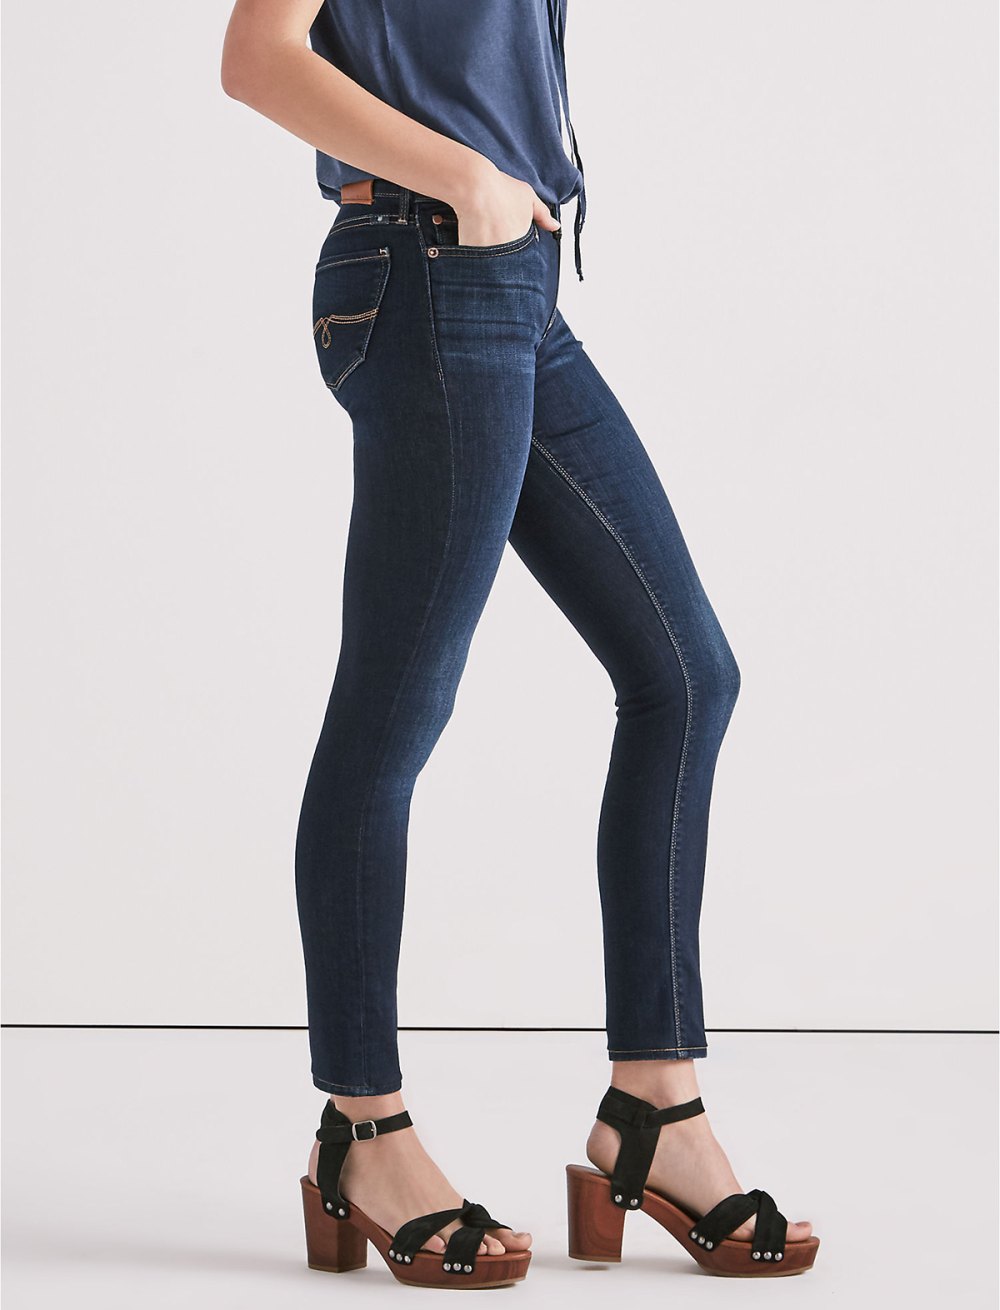 These $50 Lucky Brand Jeans Will Become an Instant Daily Uniform | Us ...